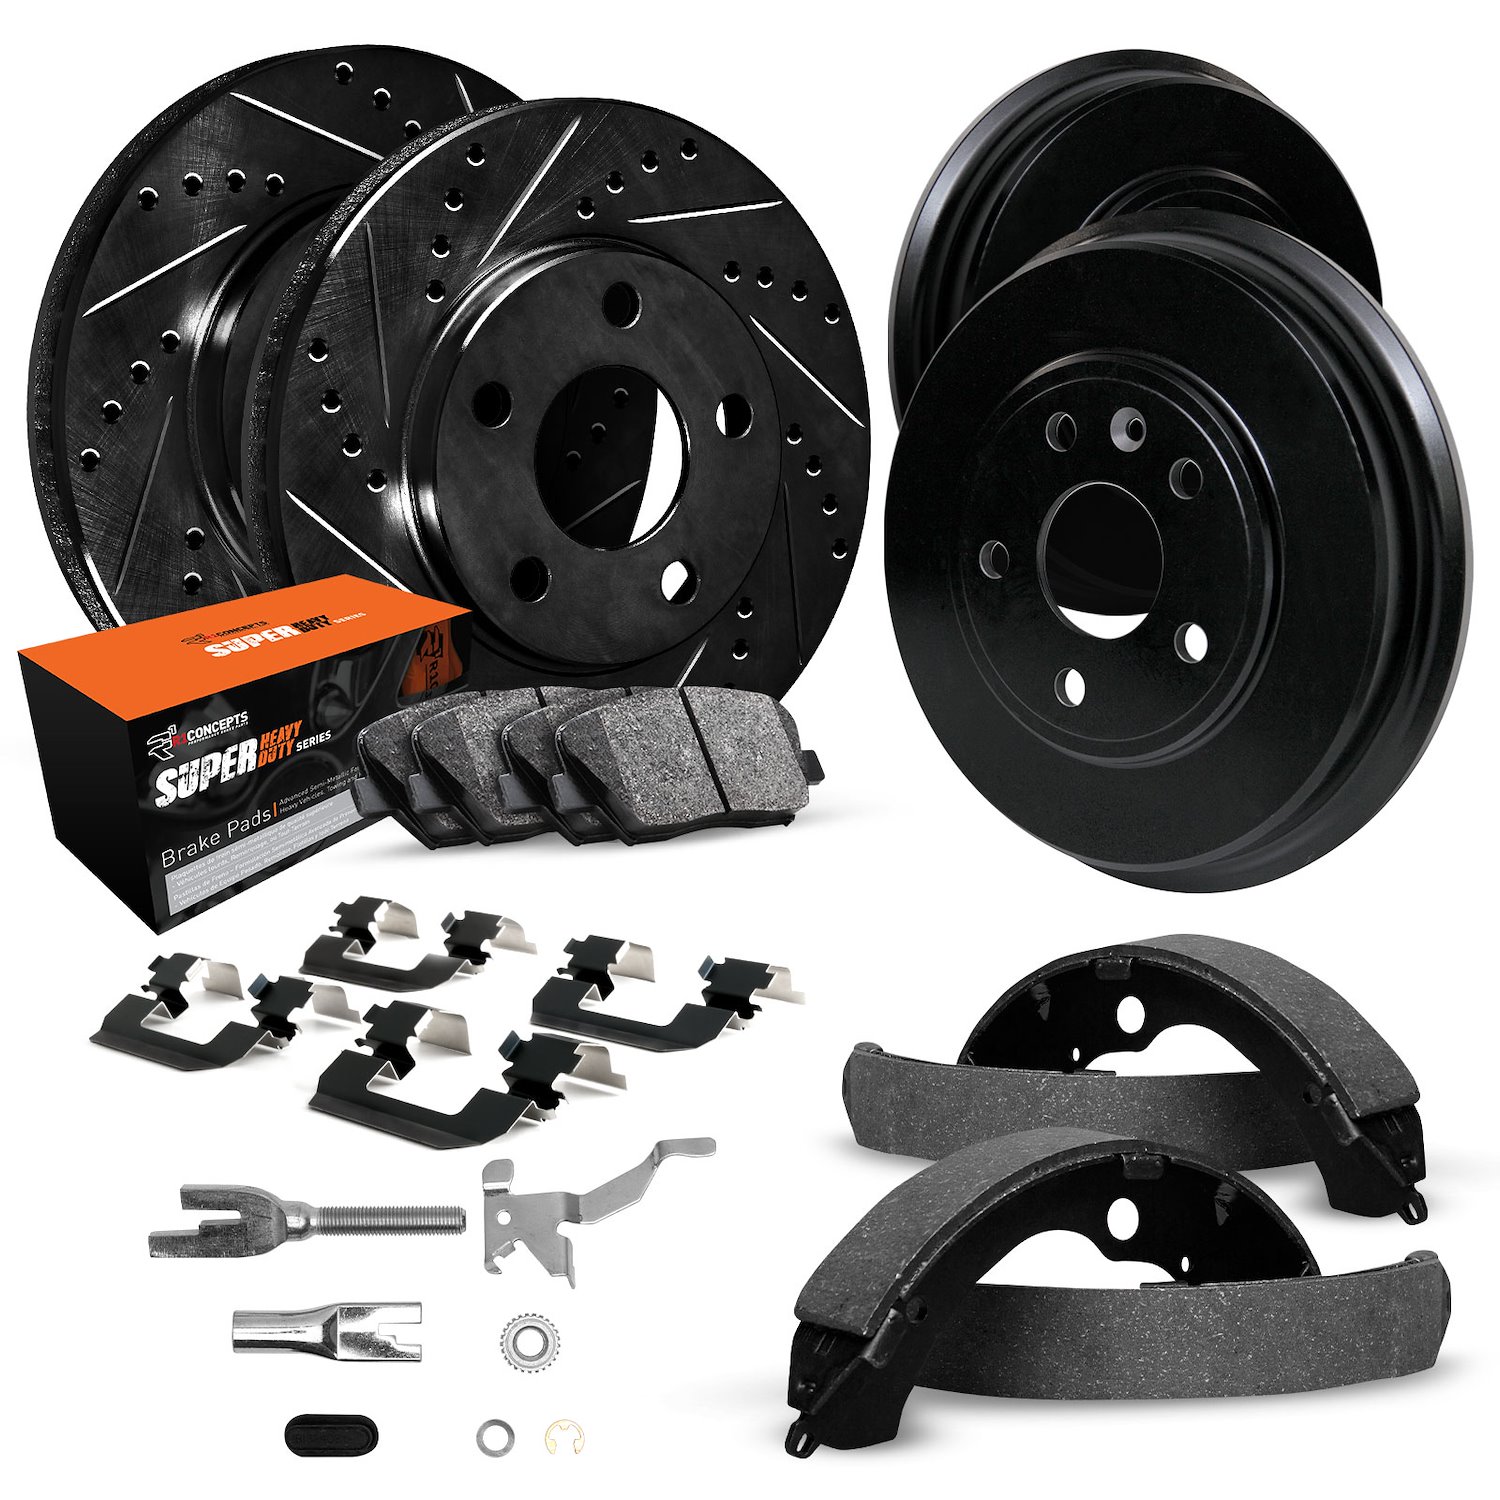 E-Line Drilled/Slotted Black Rotor & Drum Set w/Super-Duty Pads, Shoes, Hardware/Adjusters, 1972-1972 Ford/Lincoln/Mercury/Mazda